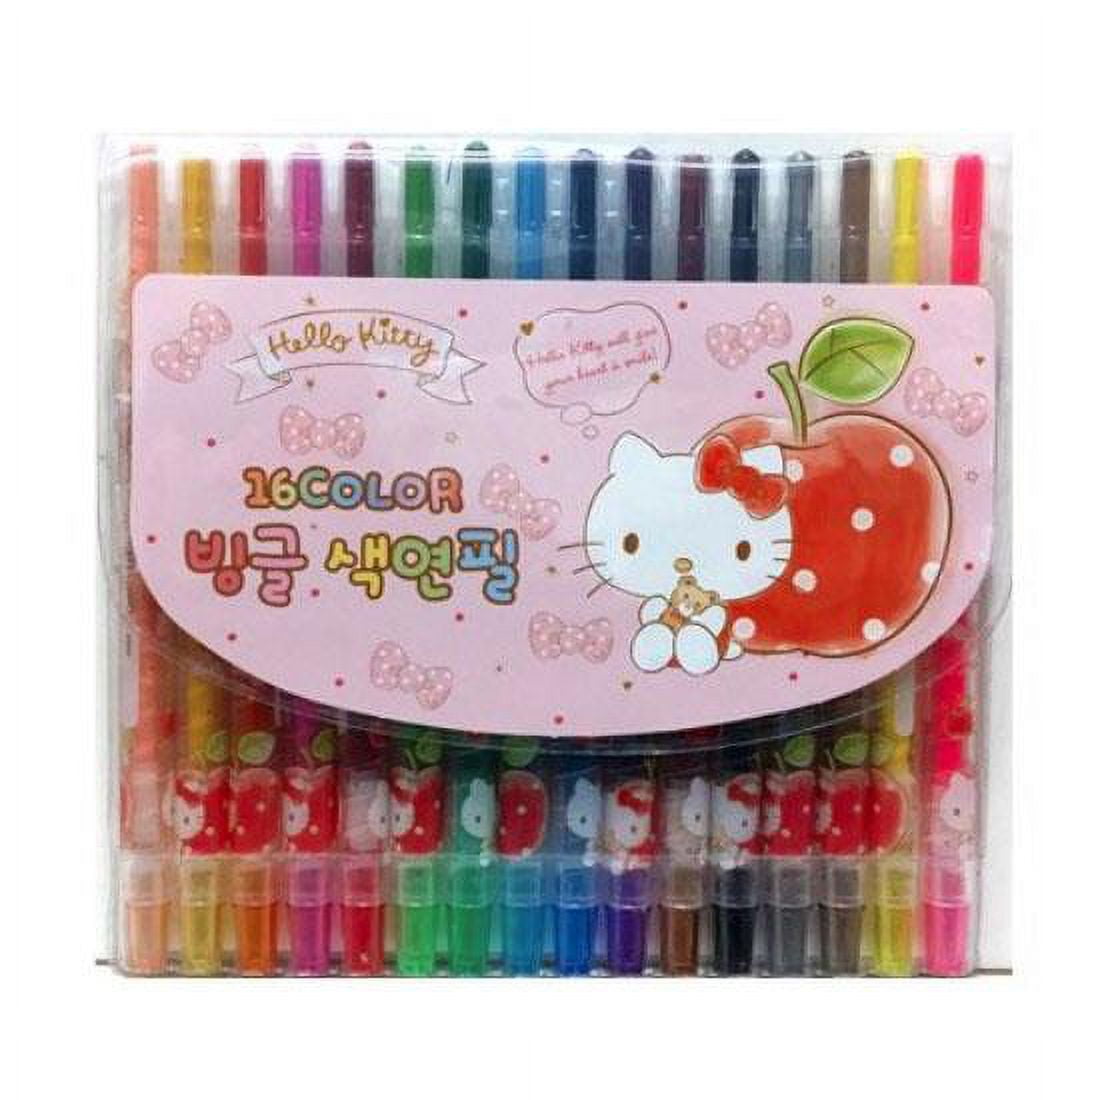 Hello Kitty Rainbow Crayon Multi-color Pencil With Interchangeable Nib 2  Pcs Set Inspired by You.